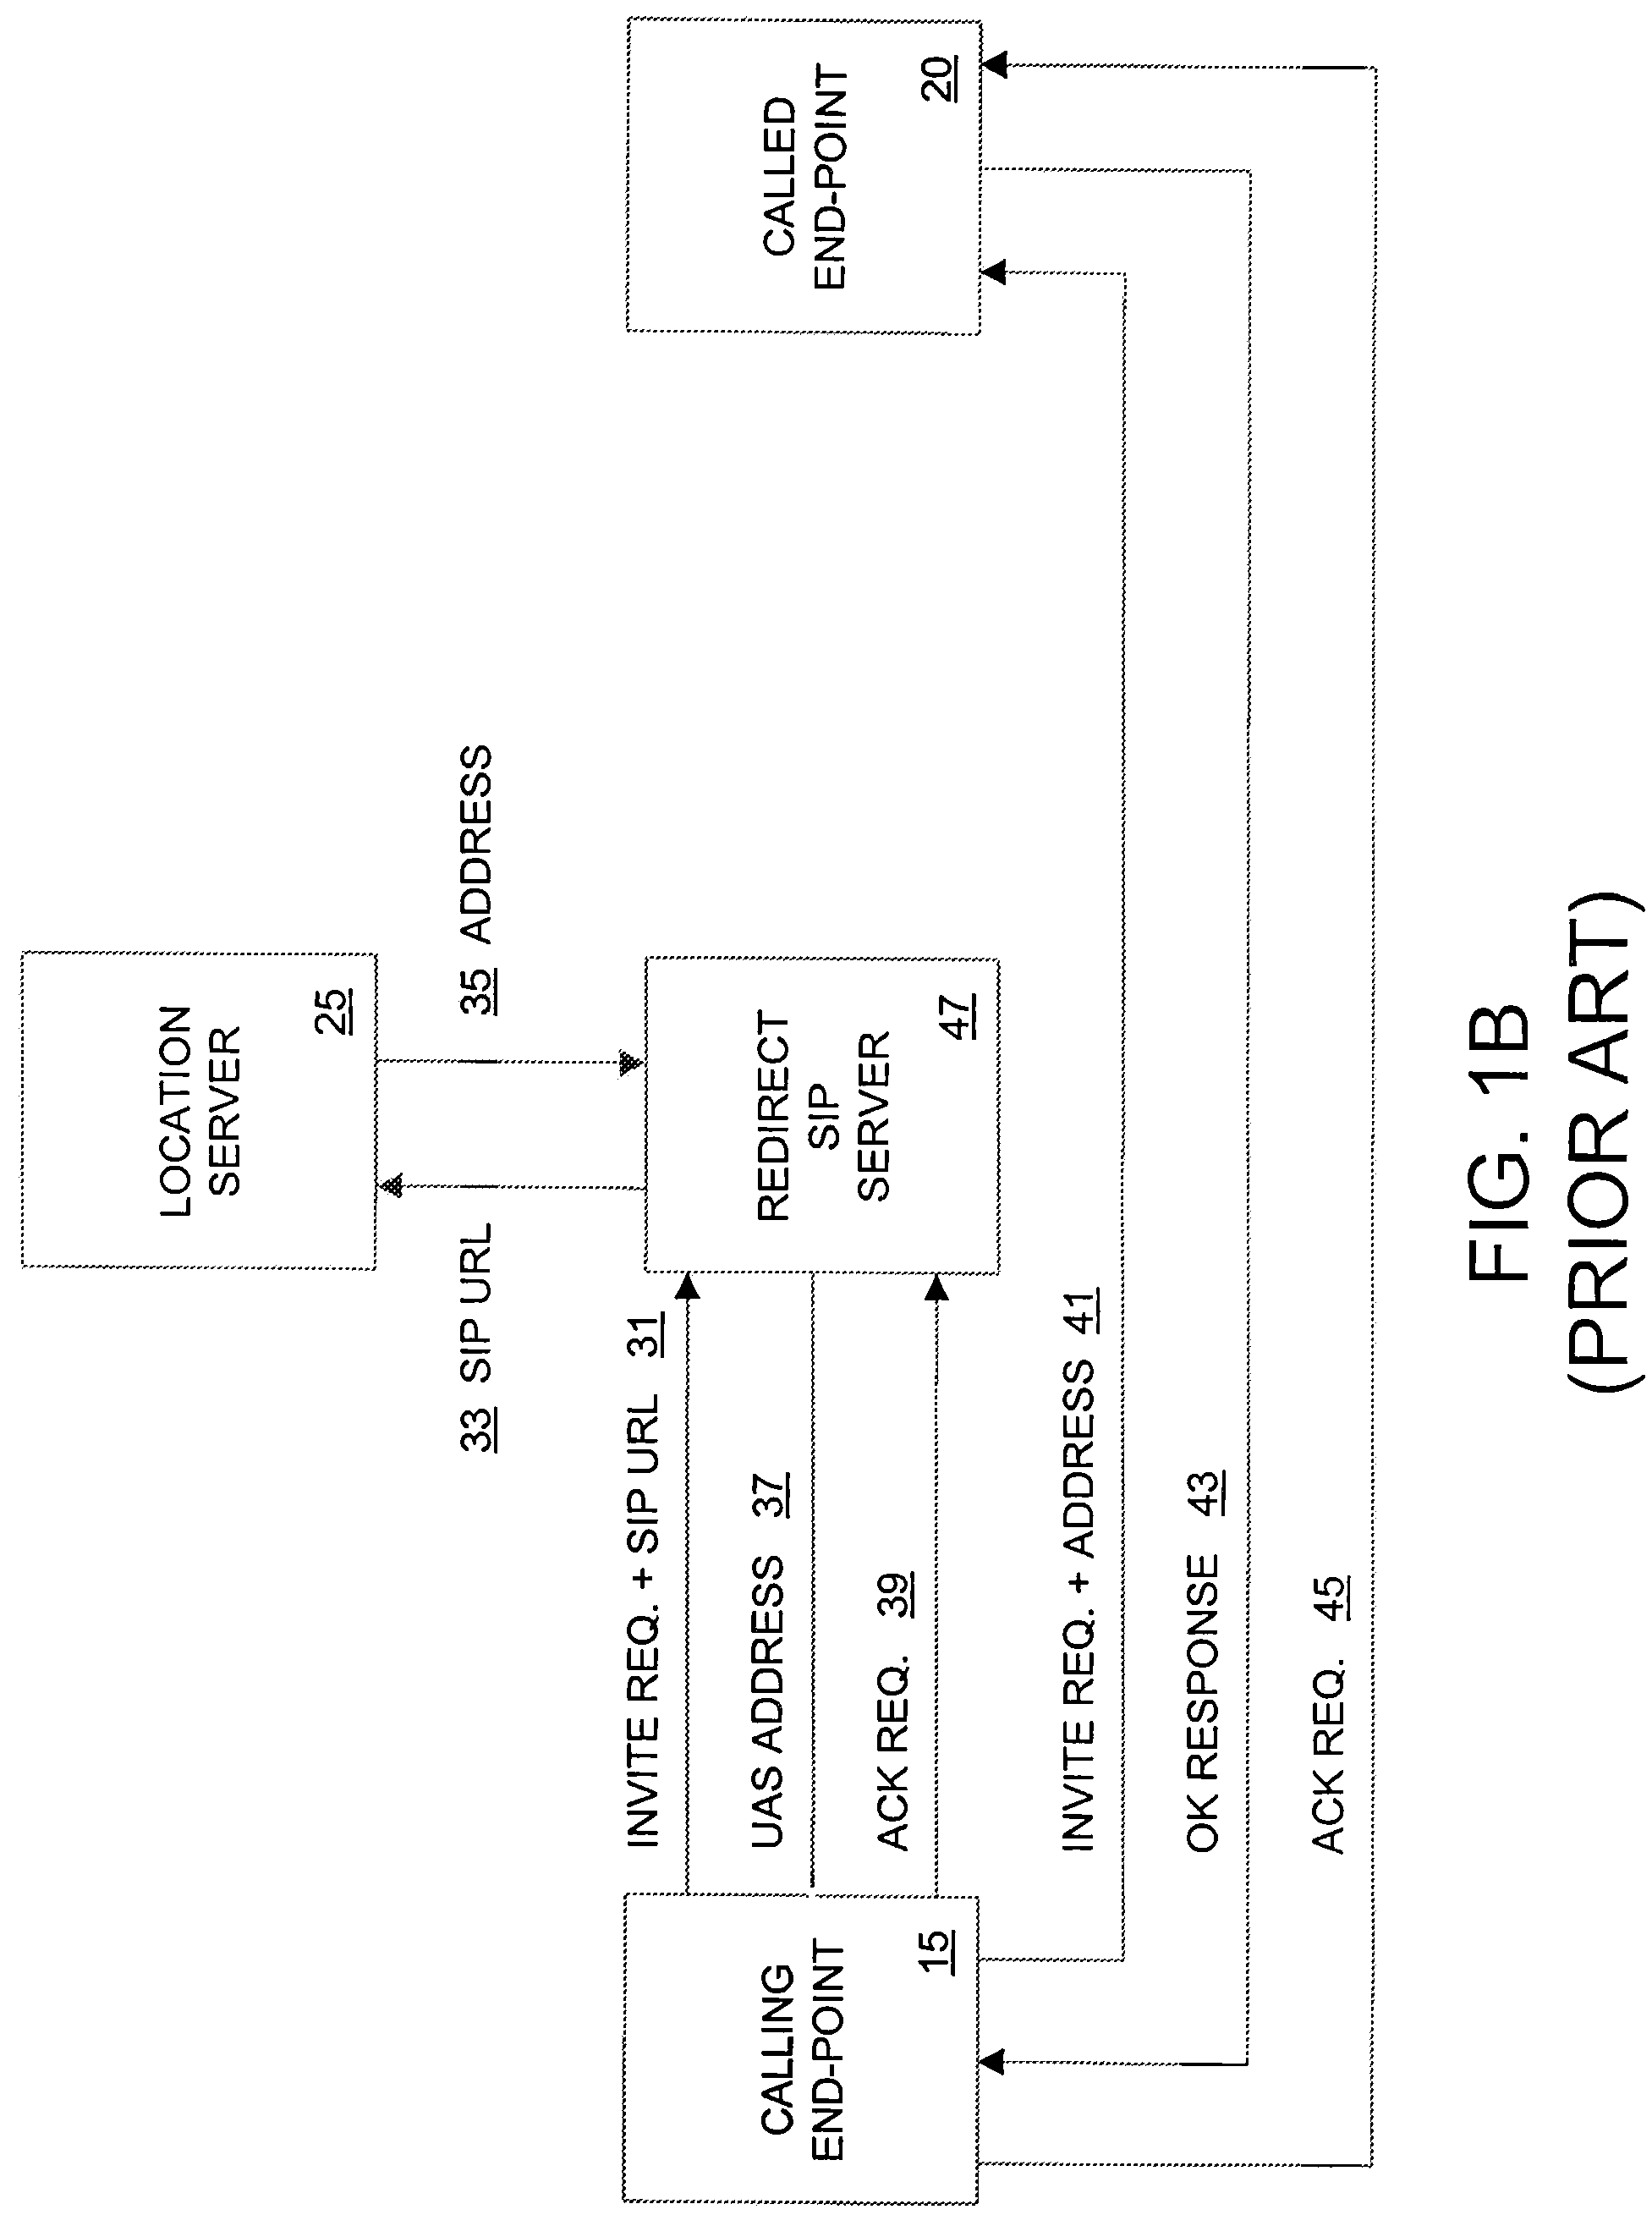 Call routing using information in session initiation protocol messages